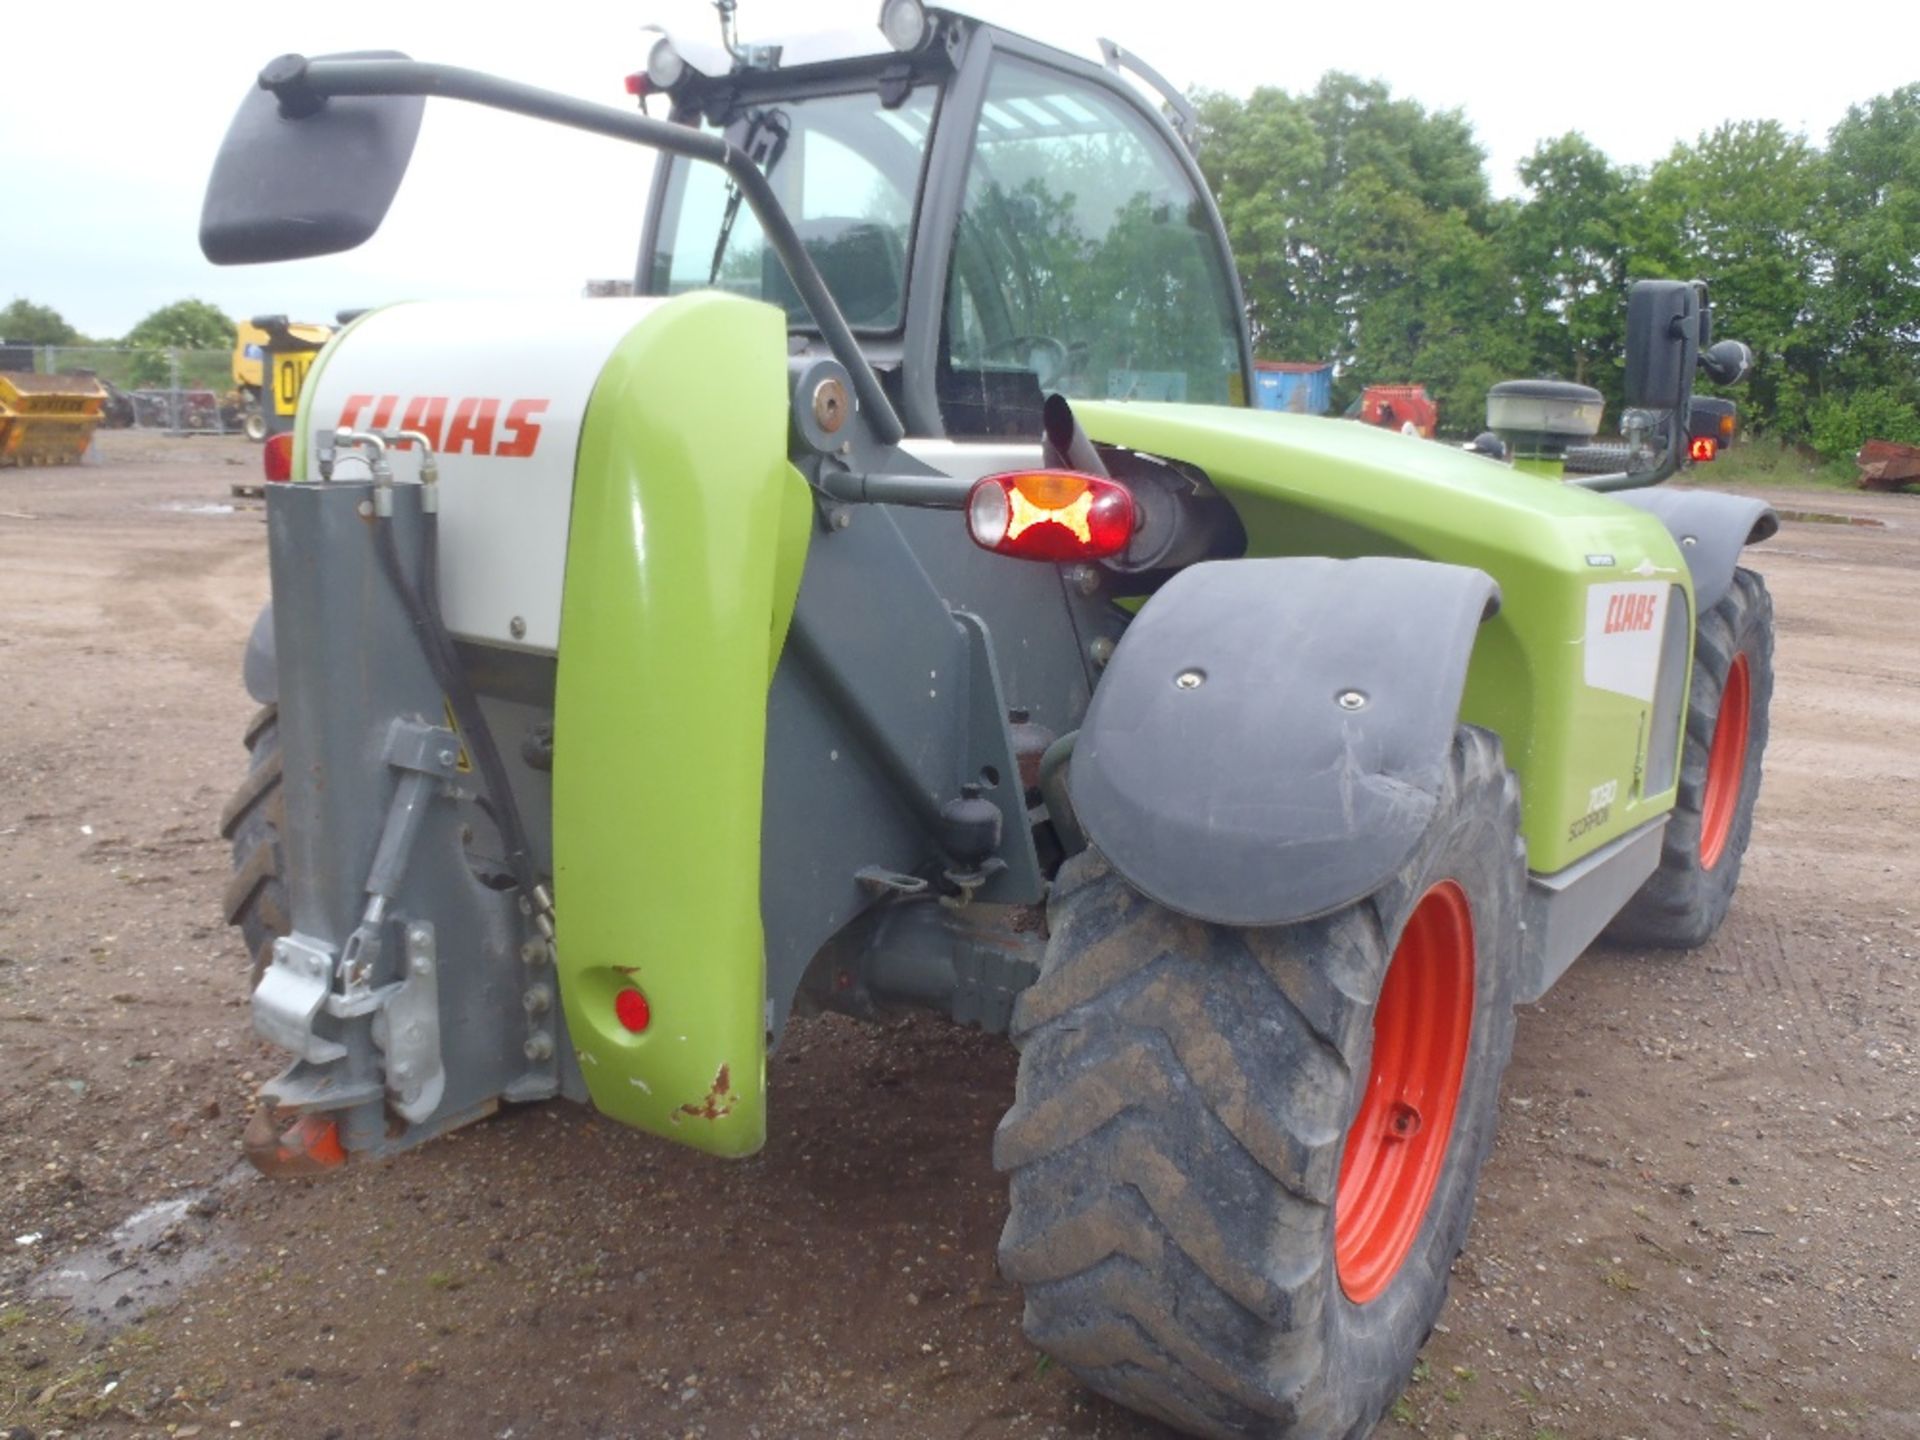 Claas Scorpion 7030. V5 will be supplied Reg. No. OU11 FHW Ser No 401030601 - Image 6 of 6